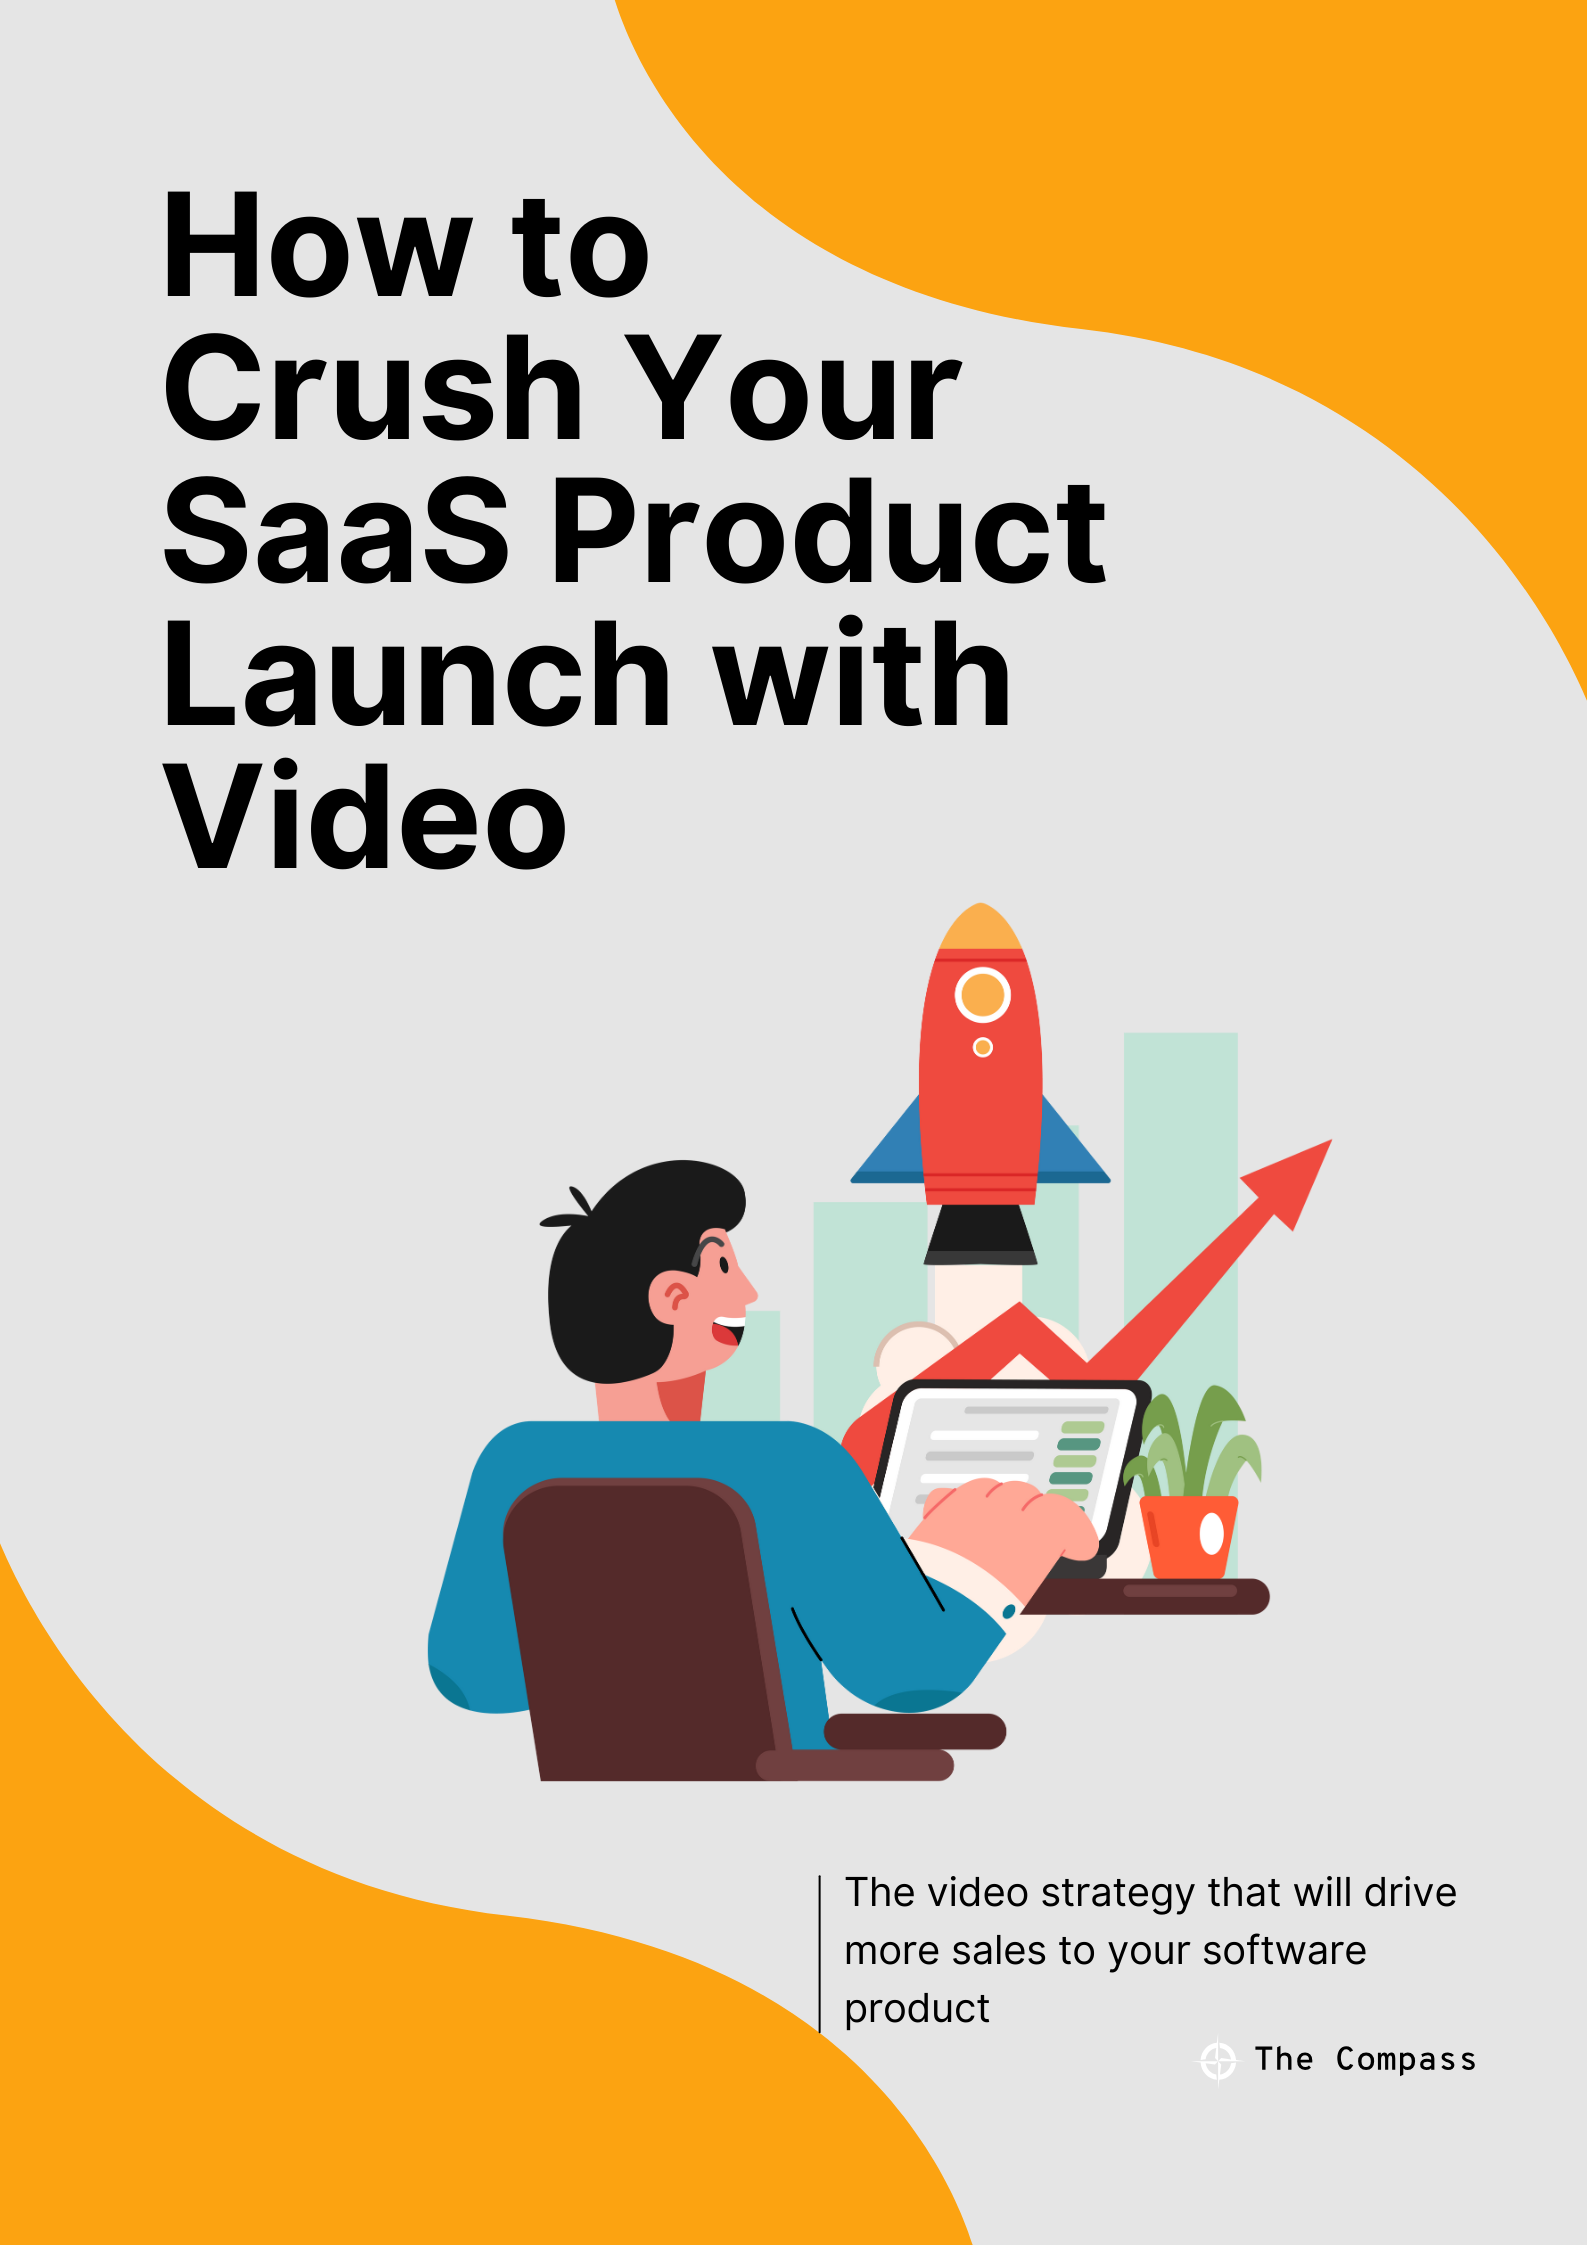 How to Crush Your SaaS Product Launch with Video